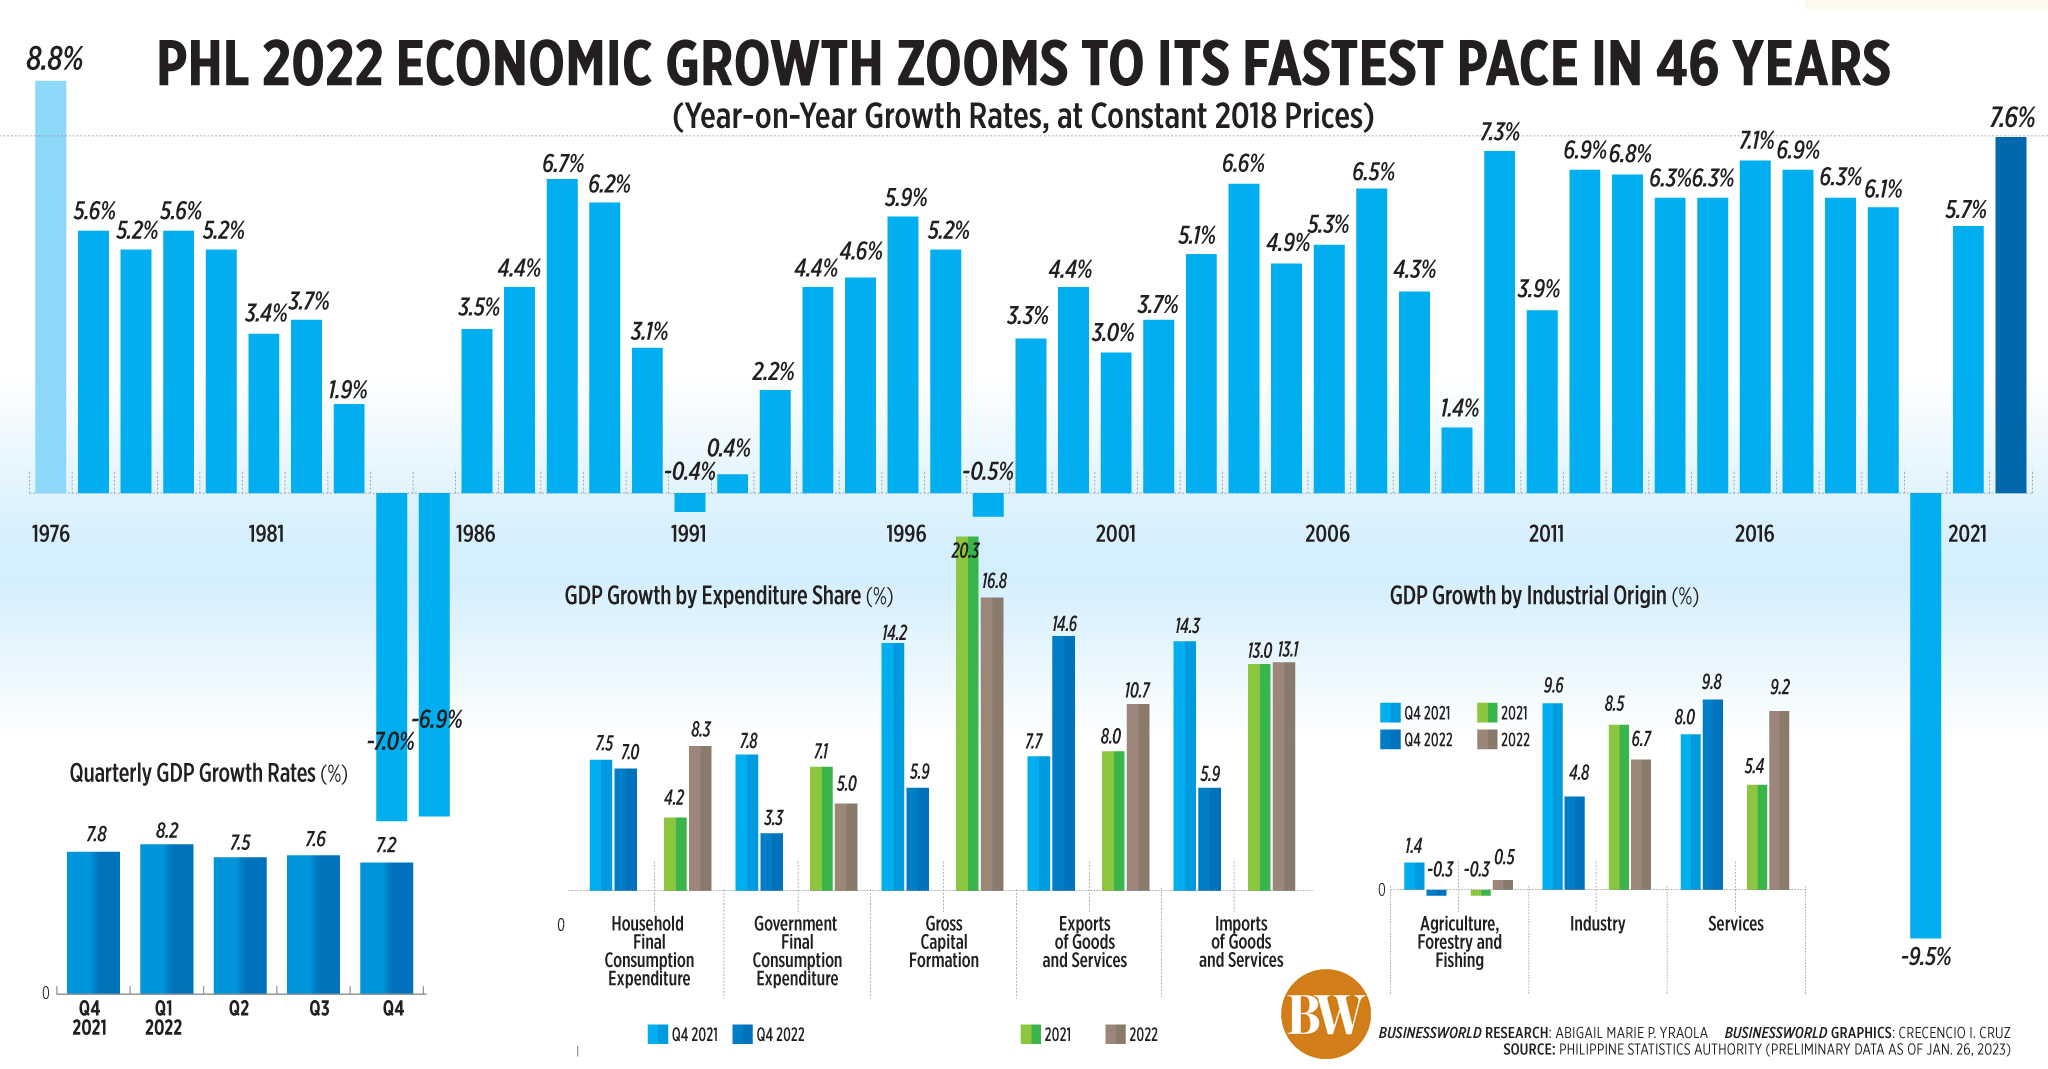 PHL 2022 economic growth zooms to its fastest pace in 46 years